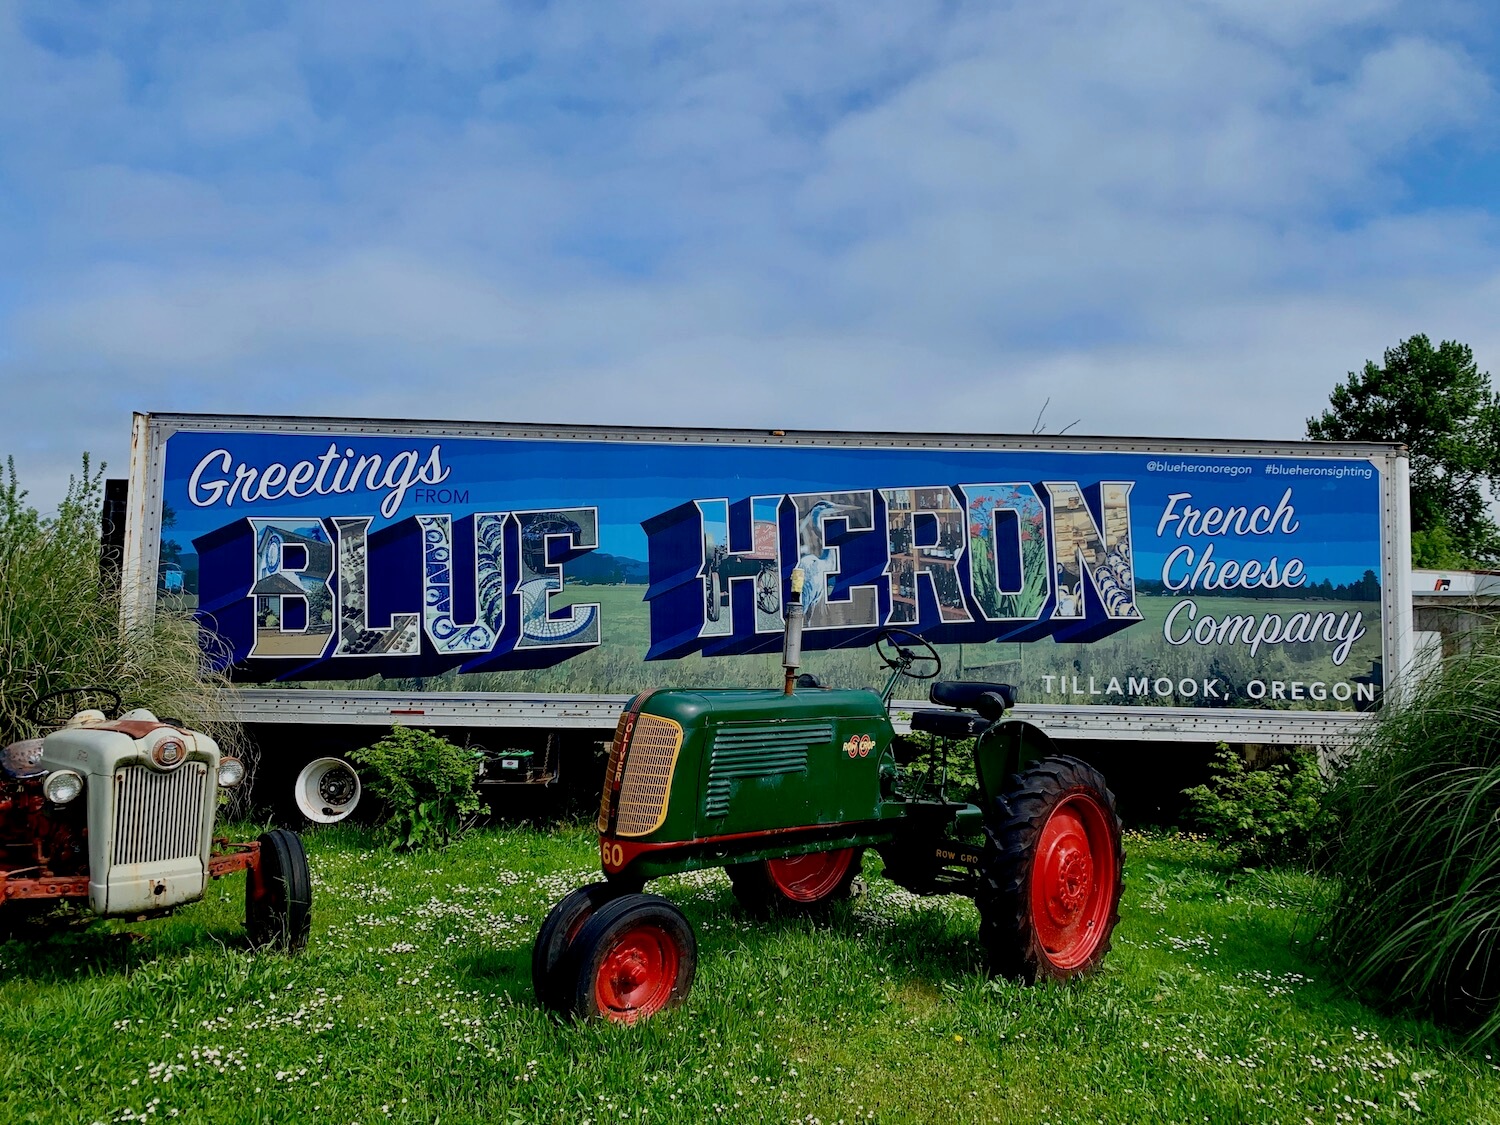 The shot shows a semi-truck trailer painted with an old fashioned post card style to promote Blue Heron French Cheese company in Tillamook, Oregon. In front of the truck, on a patch of green grass sit two retro tractors. One is green with red trim and the other white with red trim. The sky is a bright blue.